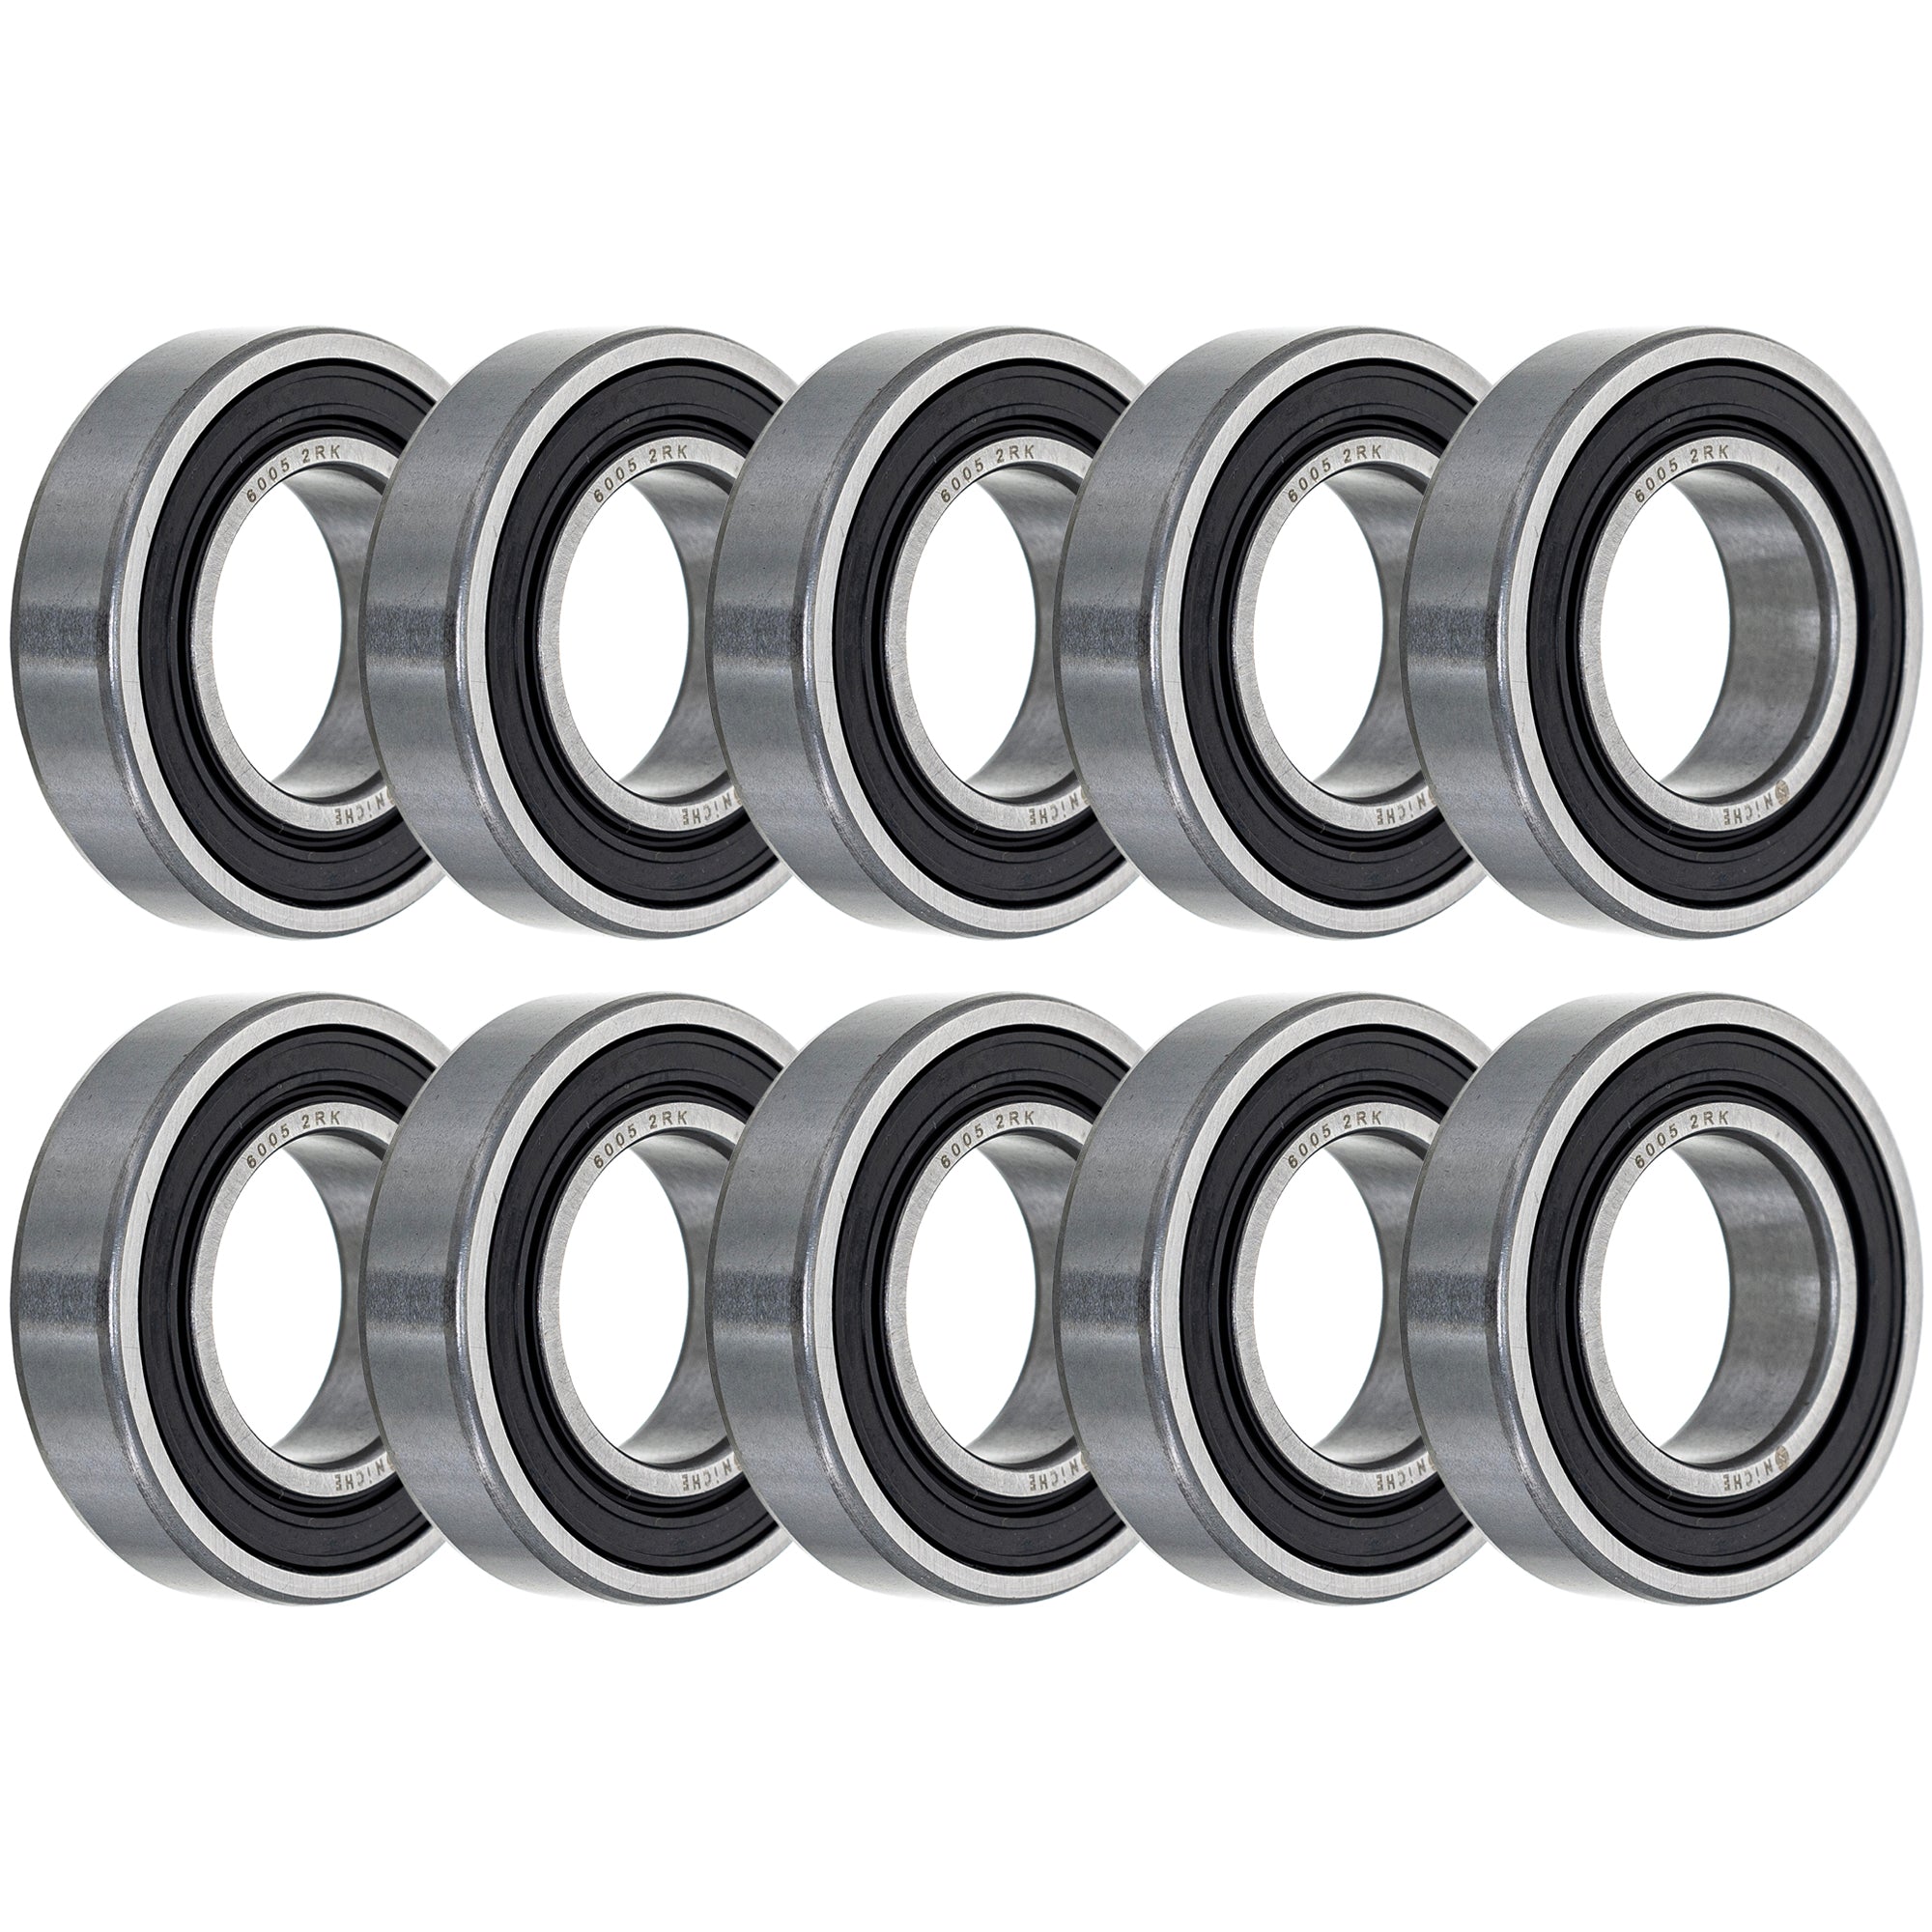 Electric Grade, Single Row, Deep Groove, Ball Bearing Pack of 10 10-Pack for zOTHER NICHE 519-CBB2210R